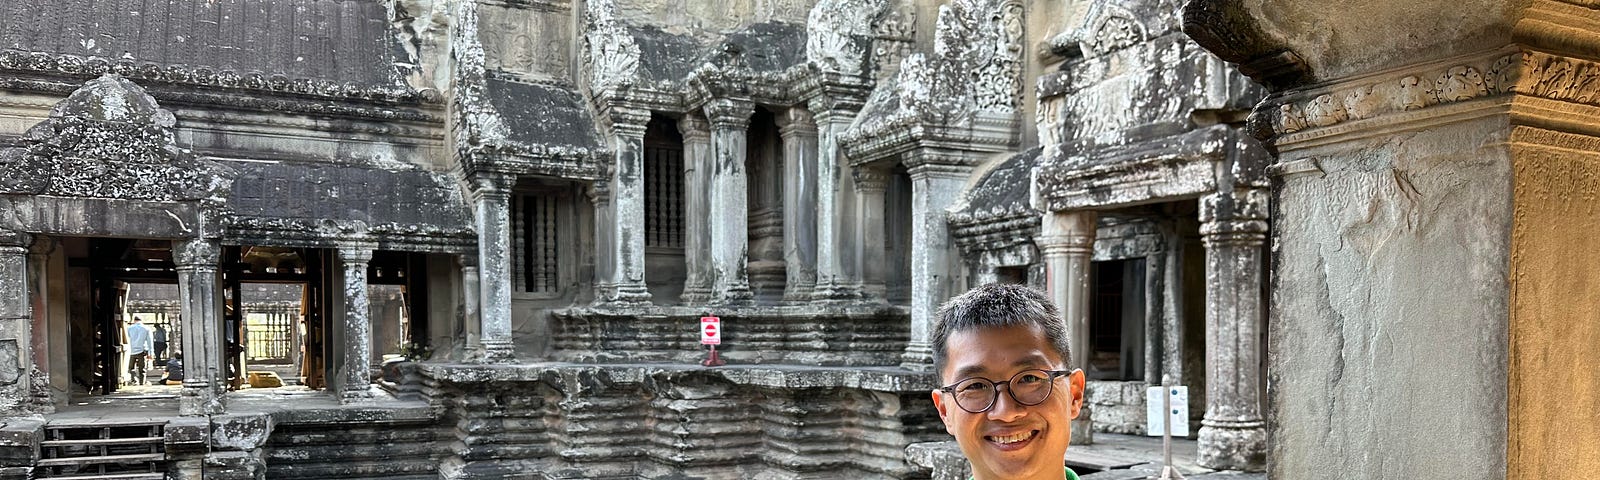 That is me taking a photo inside Angkor Wat temple